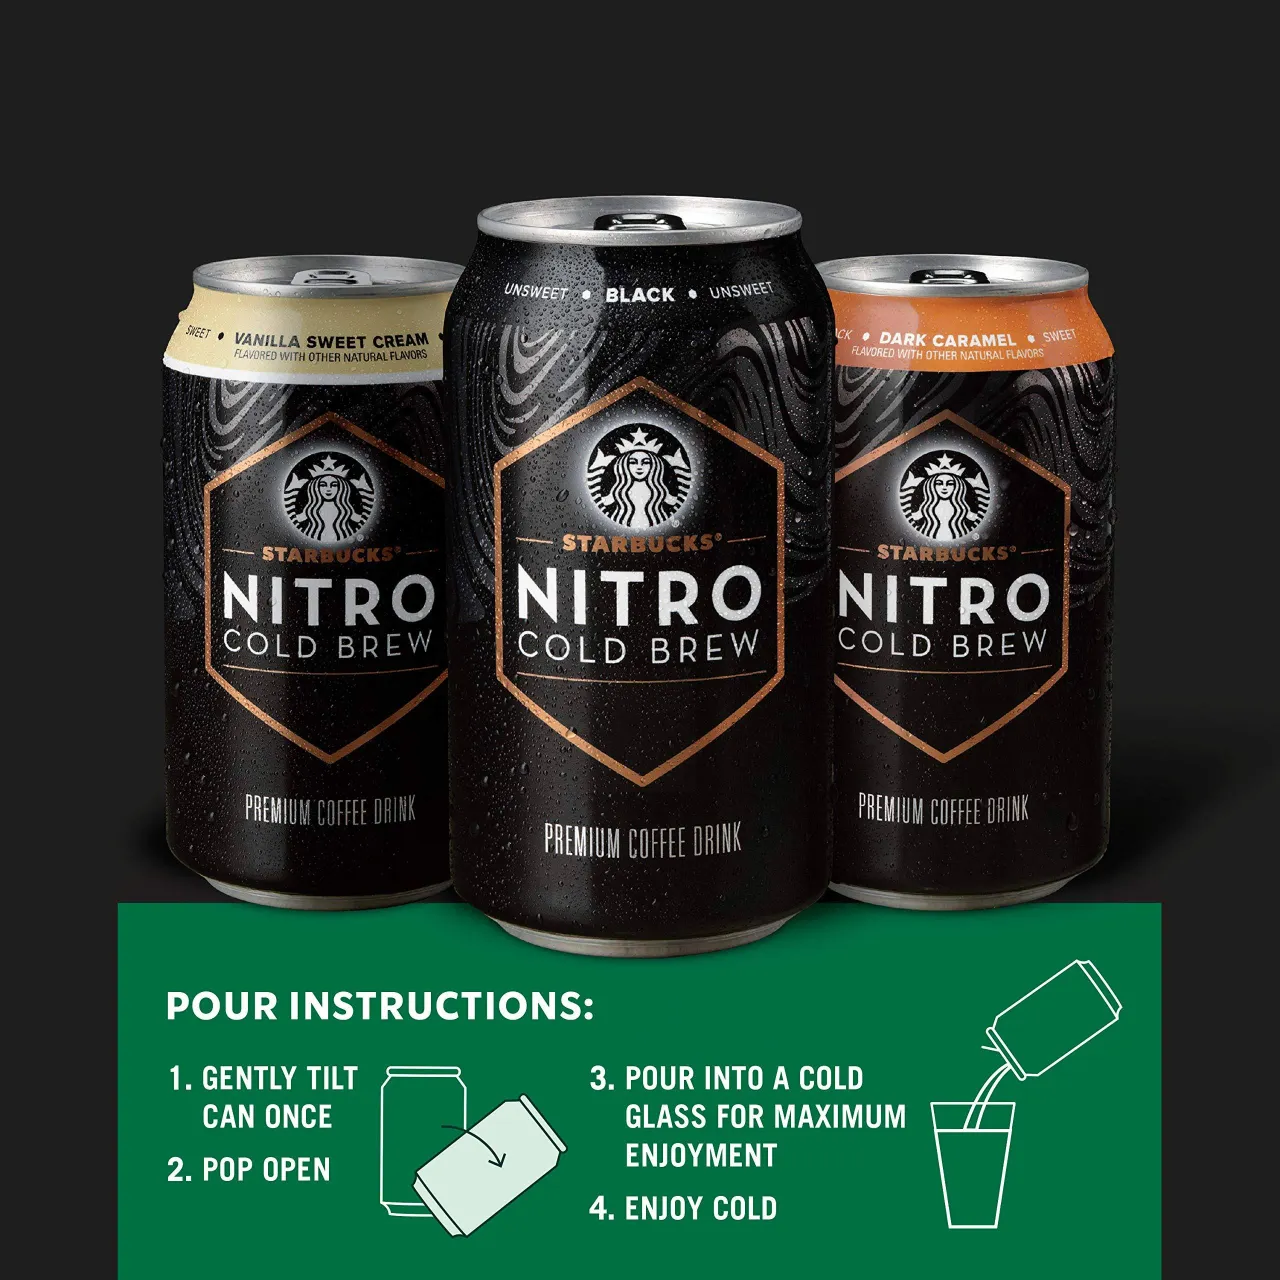 2 Starbucks Nitro Cold Brew, Plain Black, 9.6 fl oz Can (8 Pack) (Packaging Might Be Different)